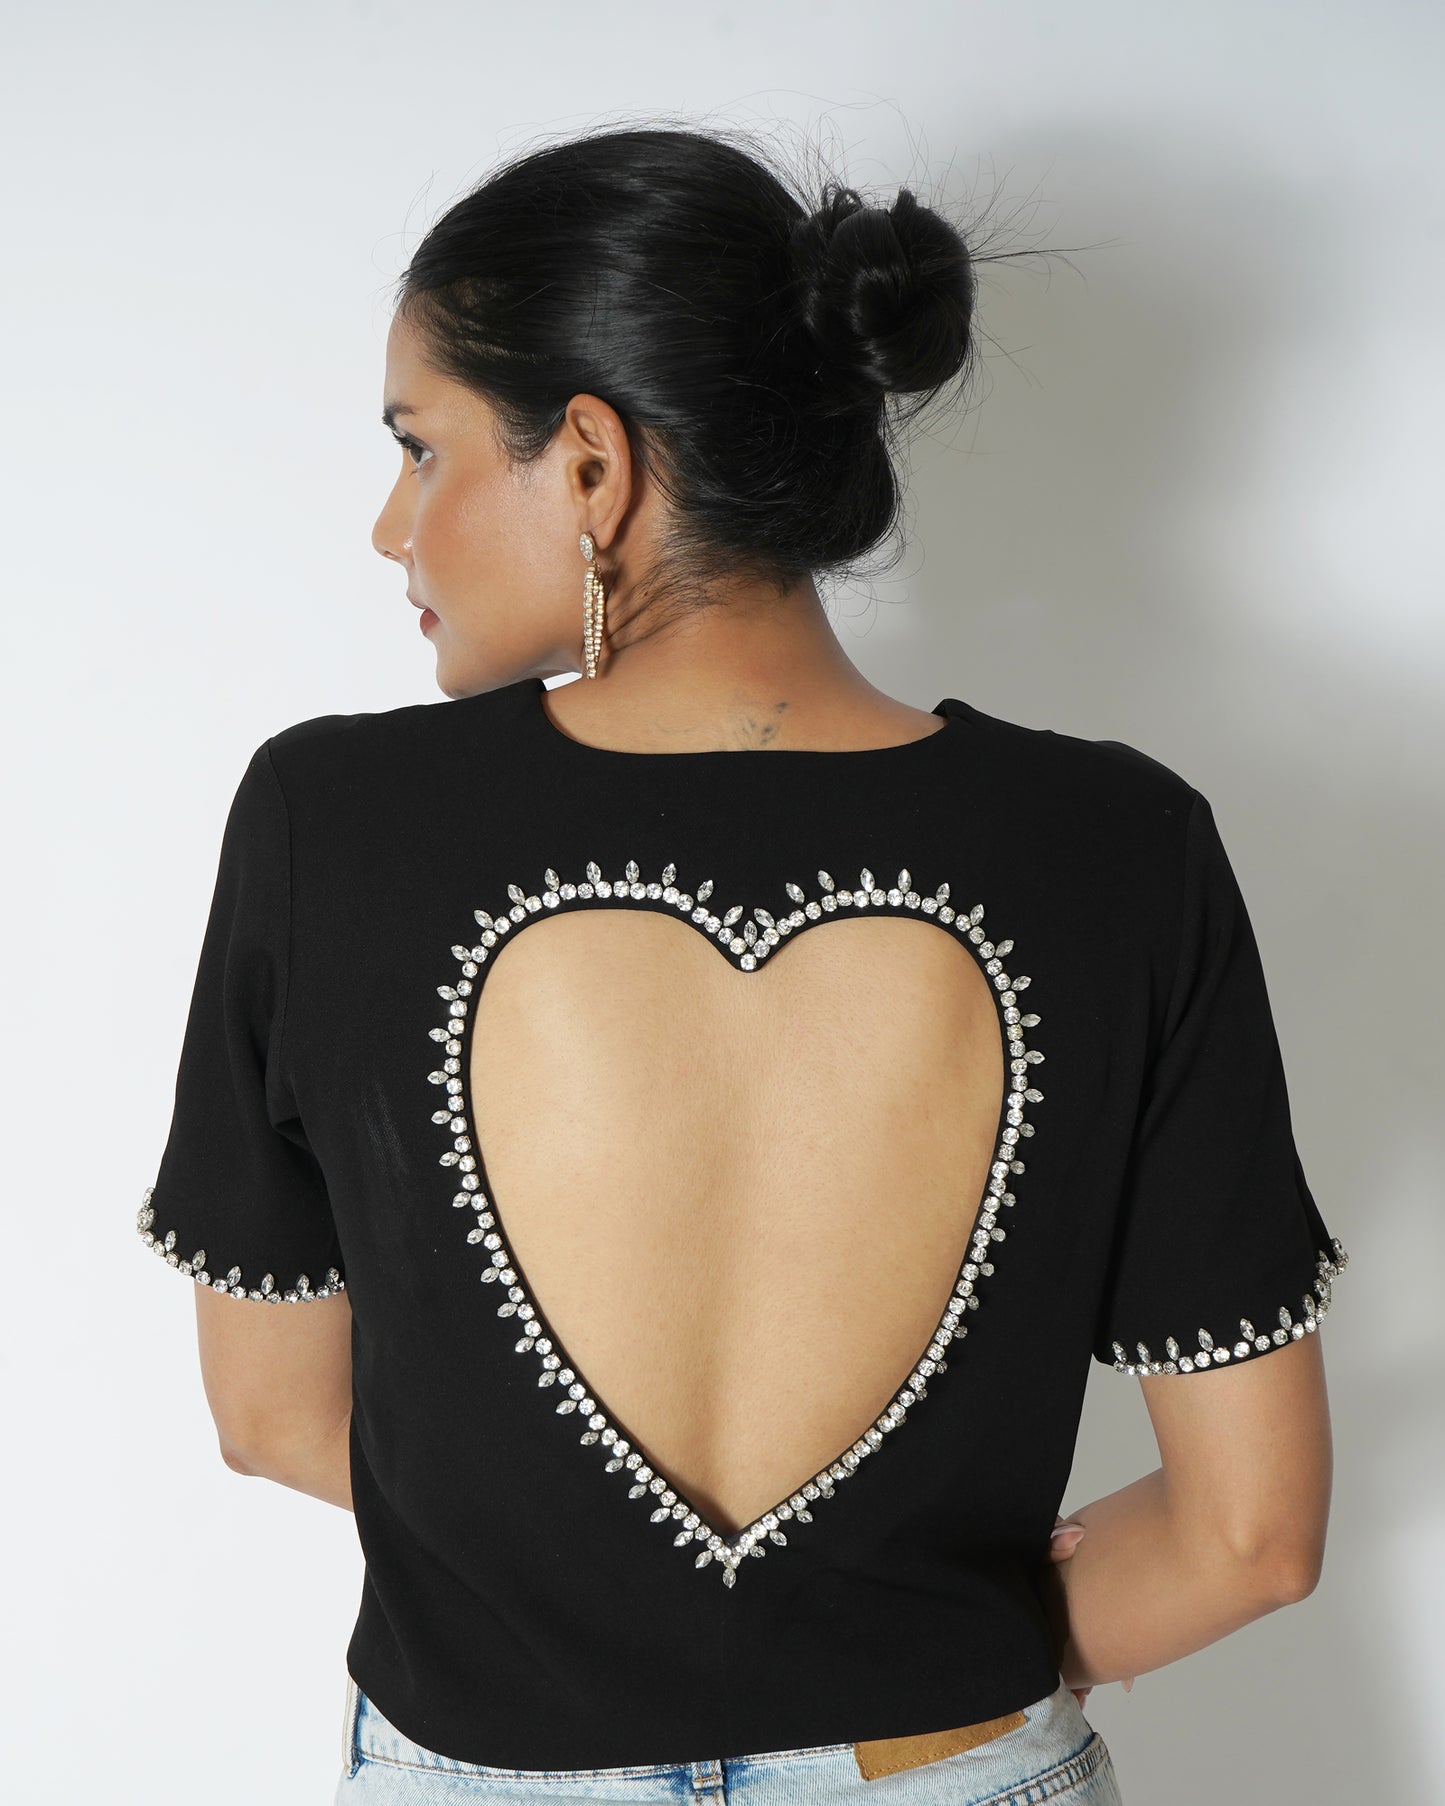 Backless top with heart cut-out